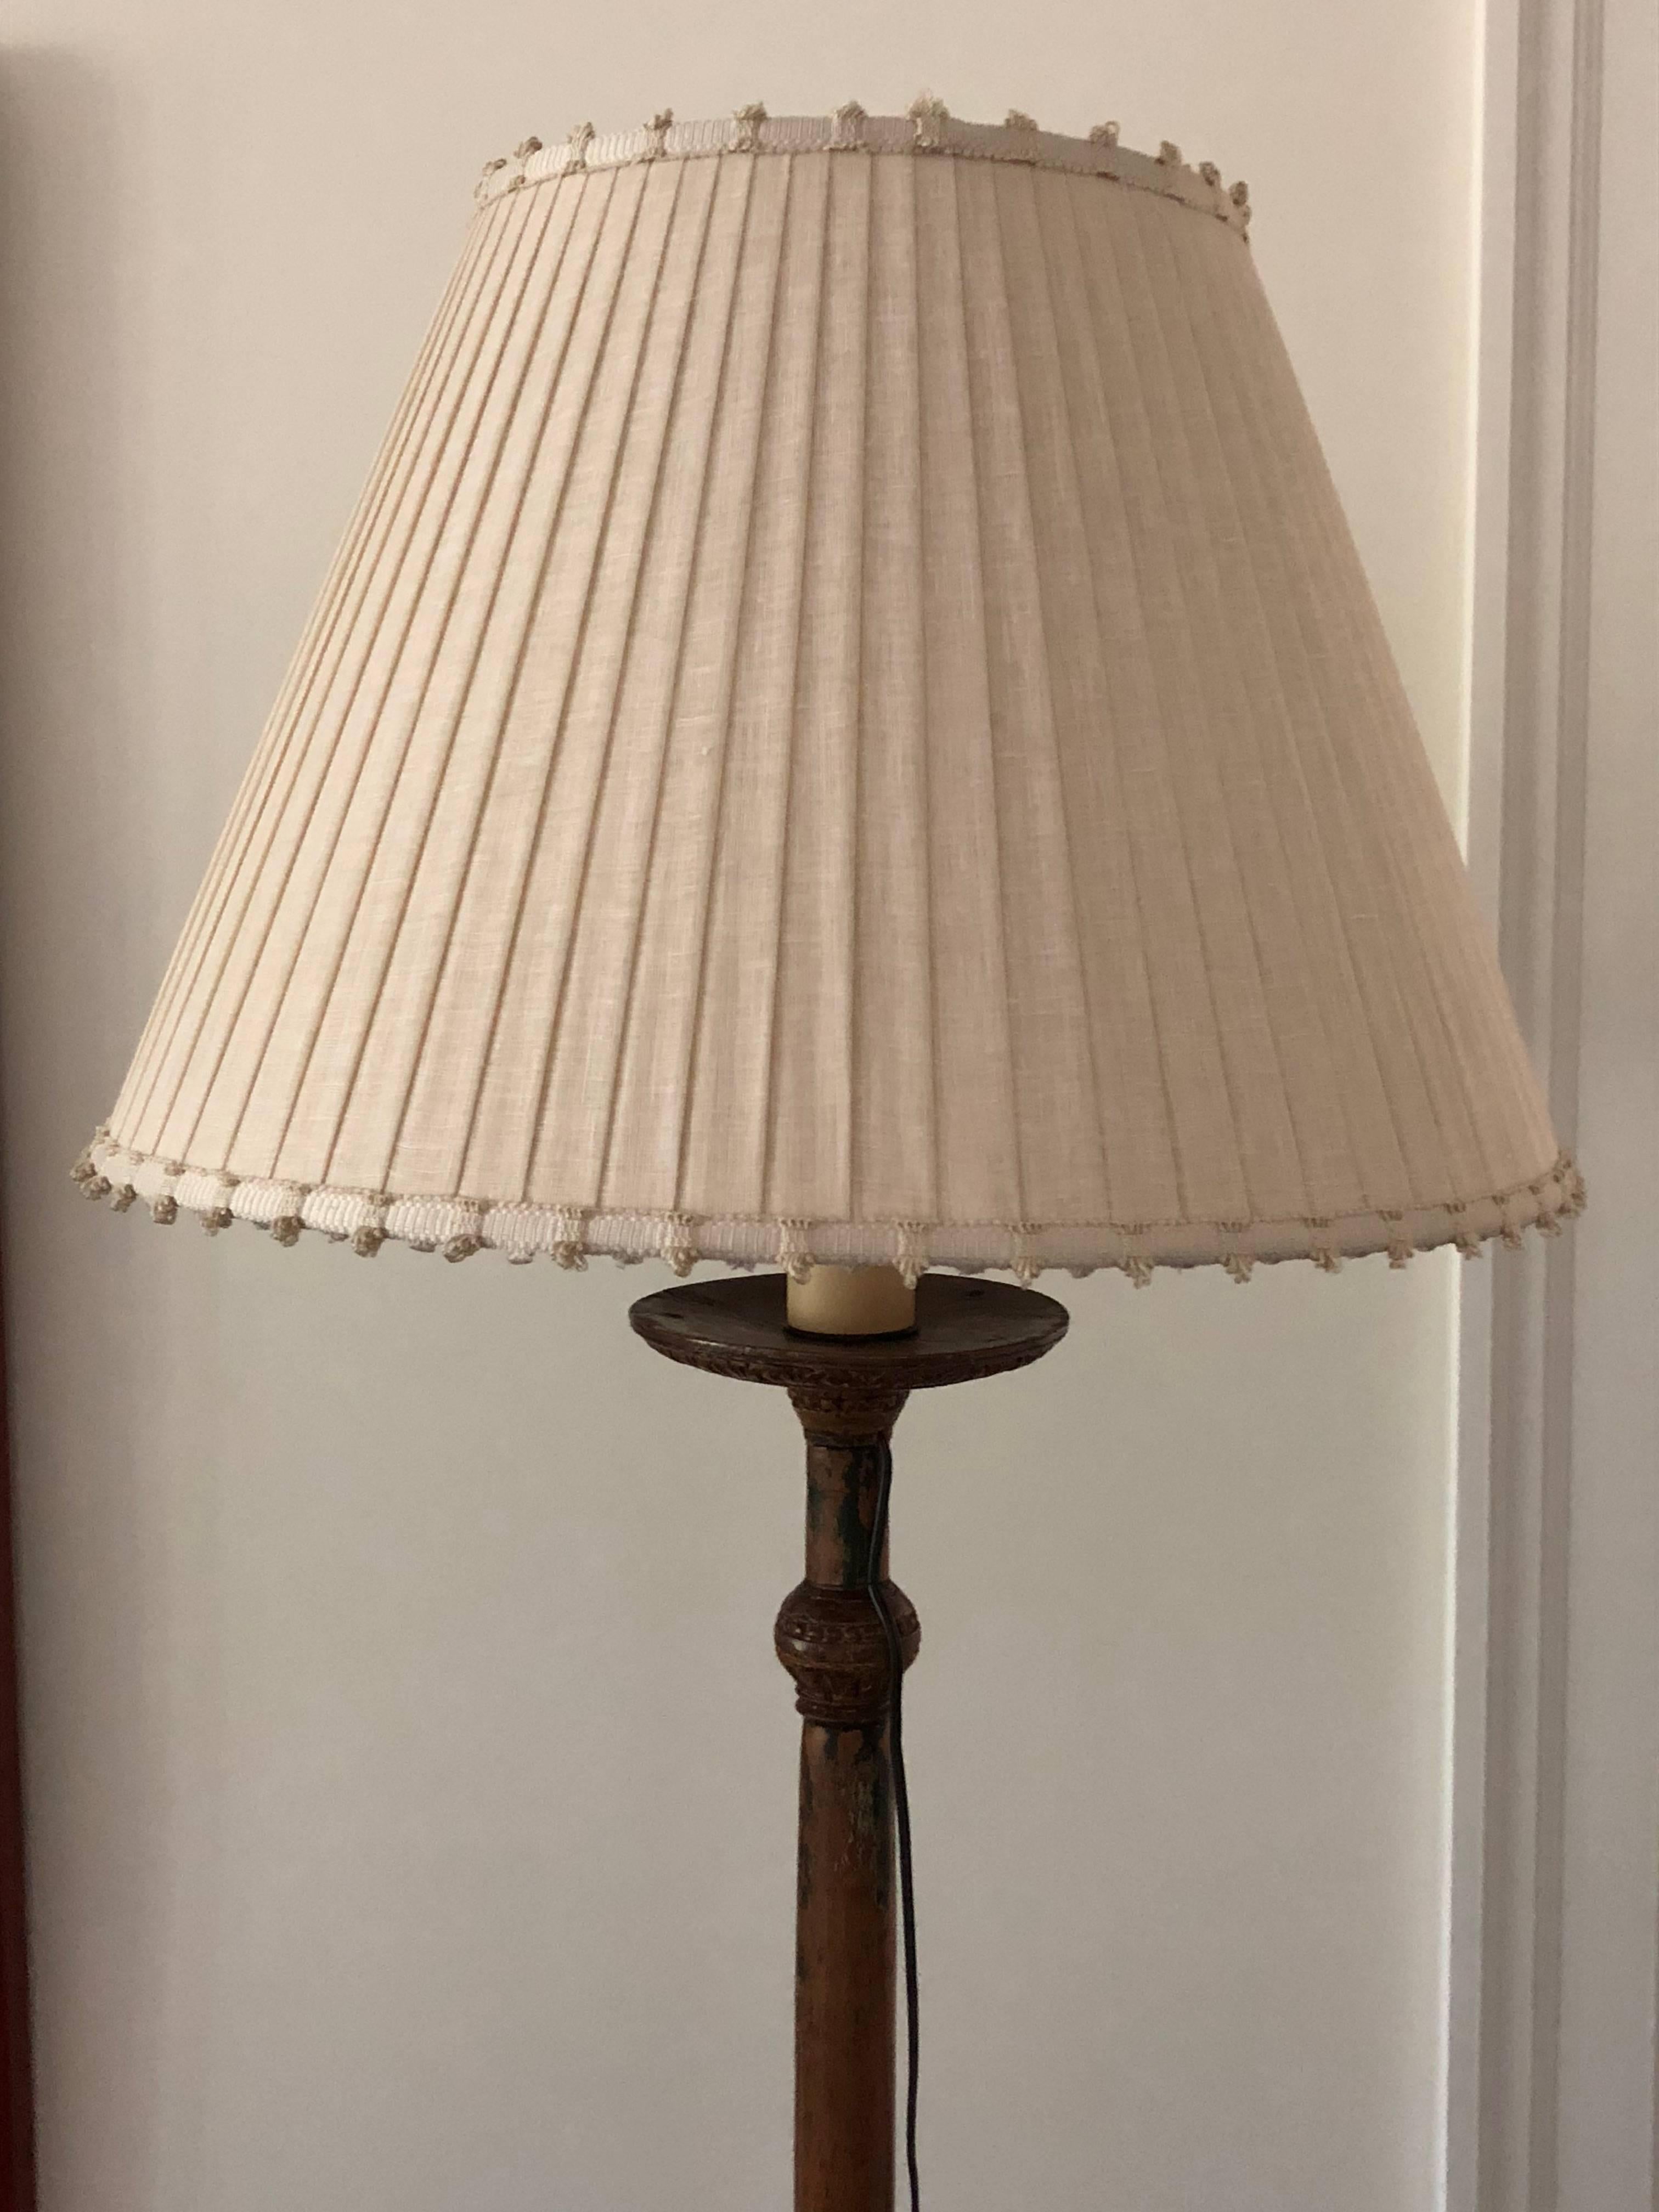 This Italian handmade, crafted, carved and painted wooden candlestick is gilded and mounted as a floor lamp well done hand-turned and three legged once being a torchiere and lacquered.